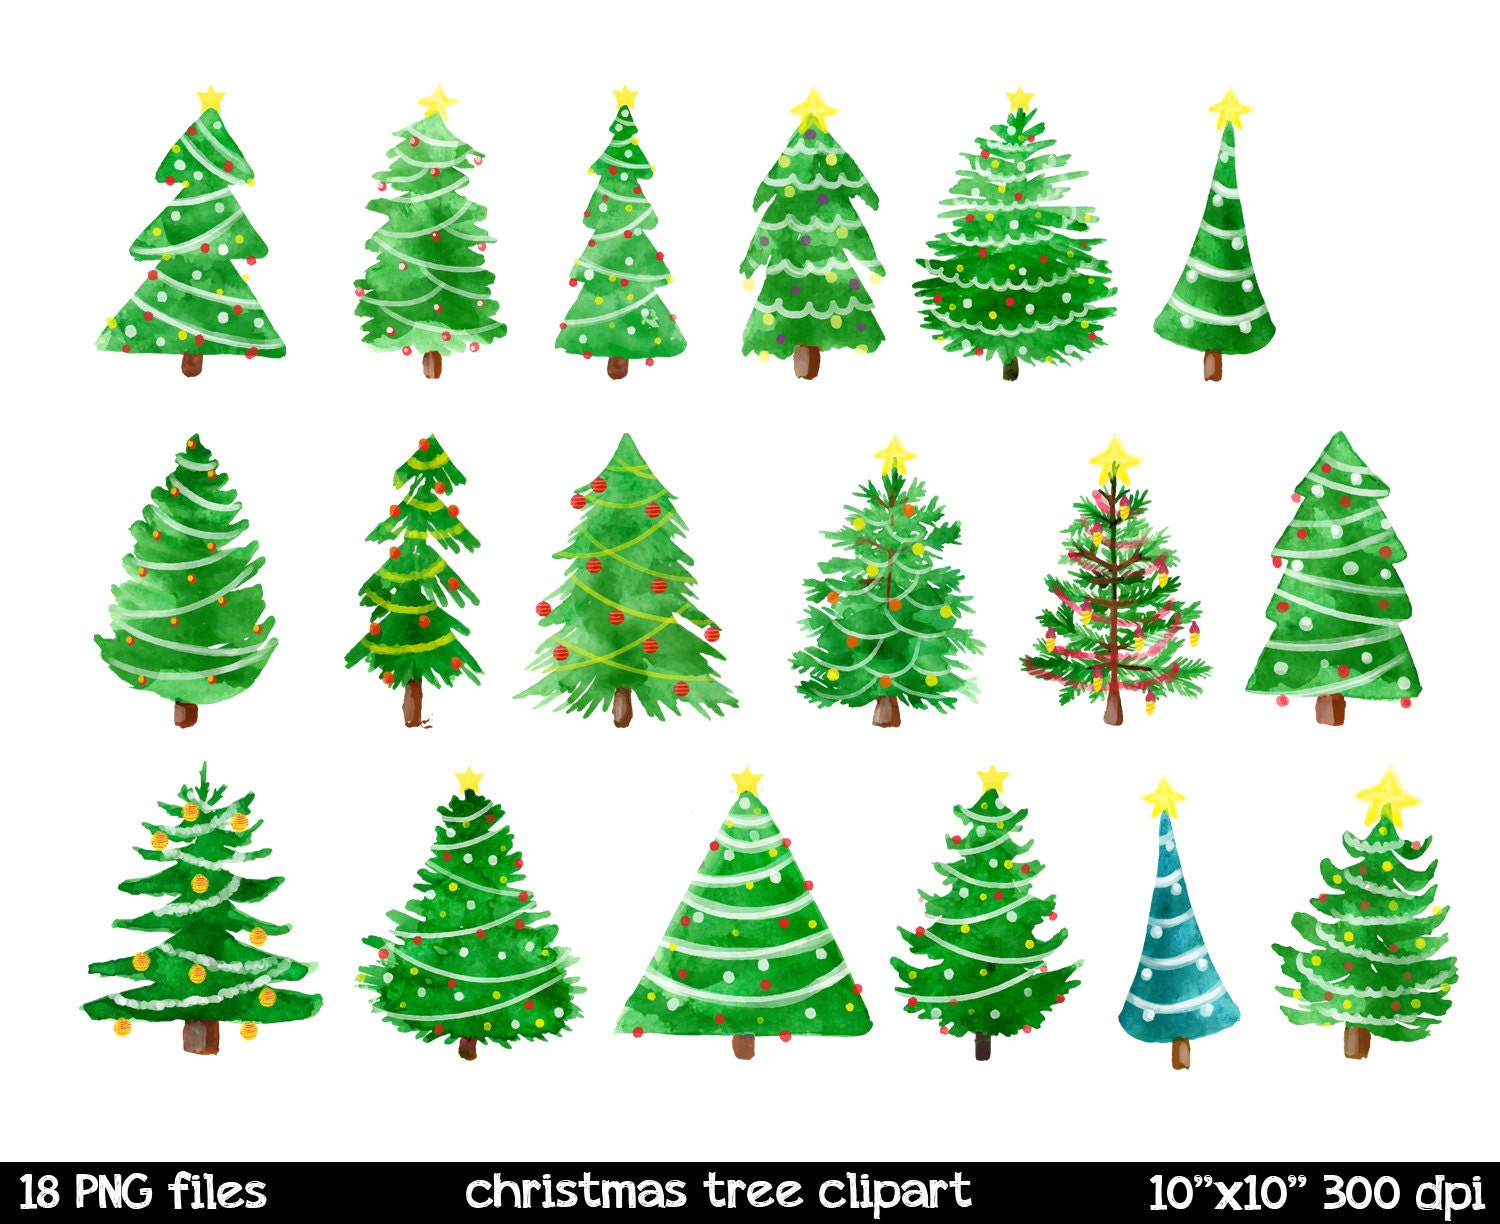 Watercolor Christmas Clipart Christmas Tree Clipart by SorbetBox